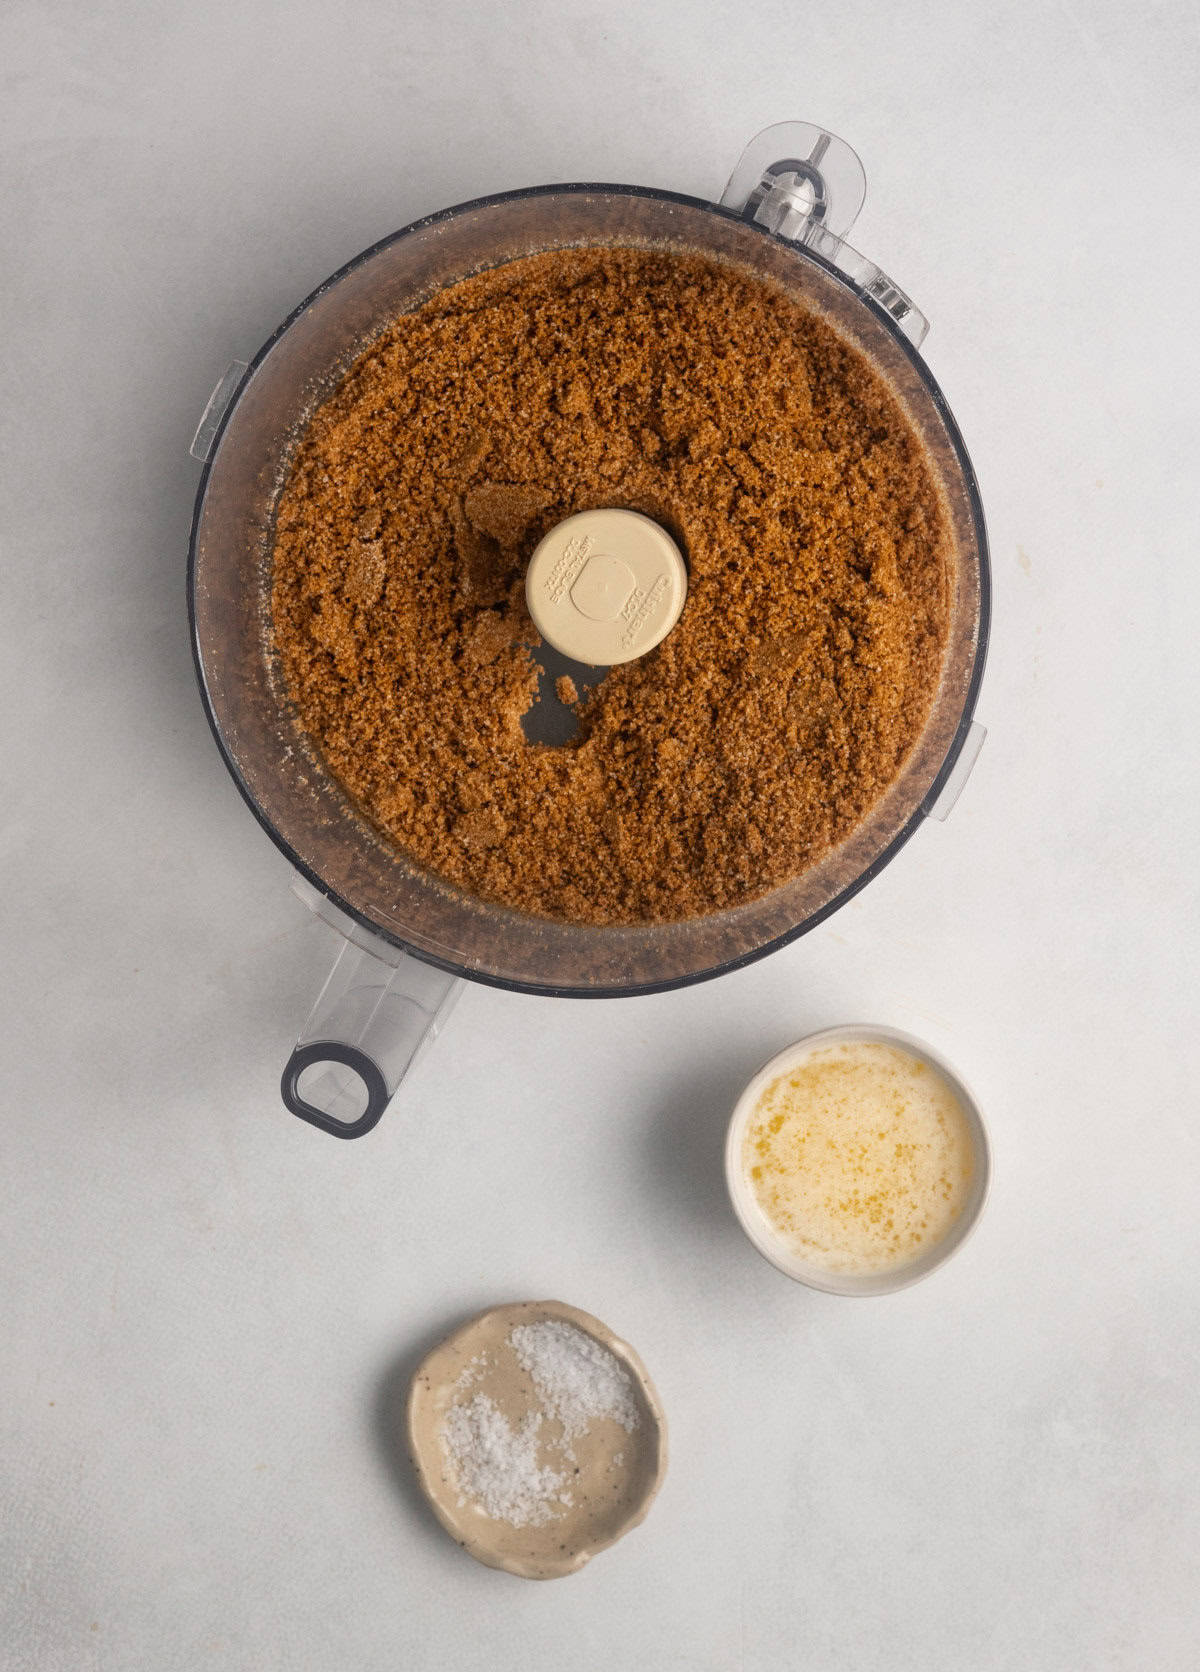 Image shows the pulverized gluten-free gingersnaps and granulated sugar used for gluten free pumpkin cheesecake.